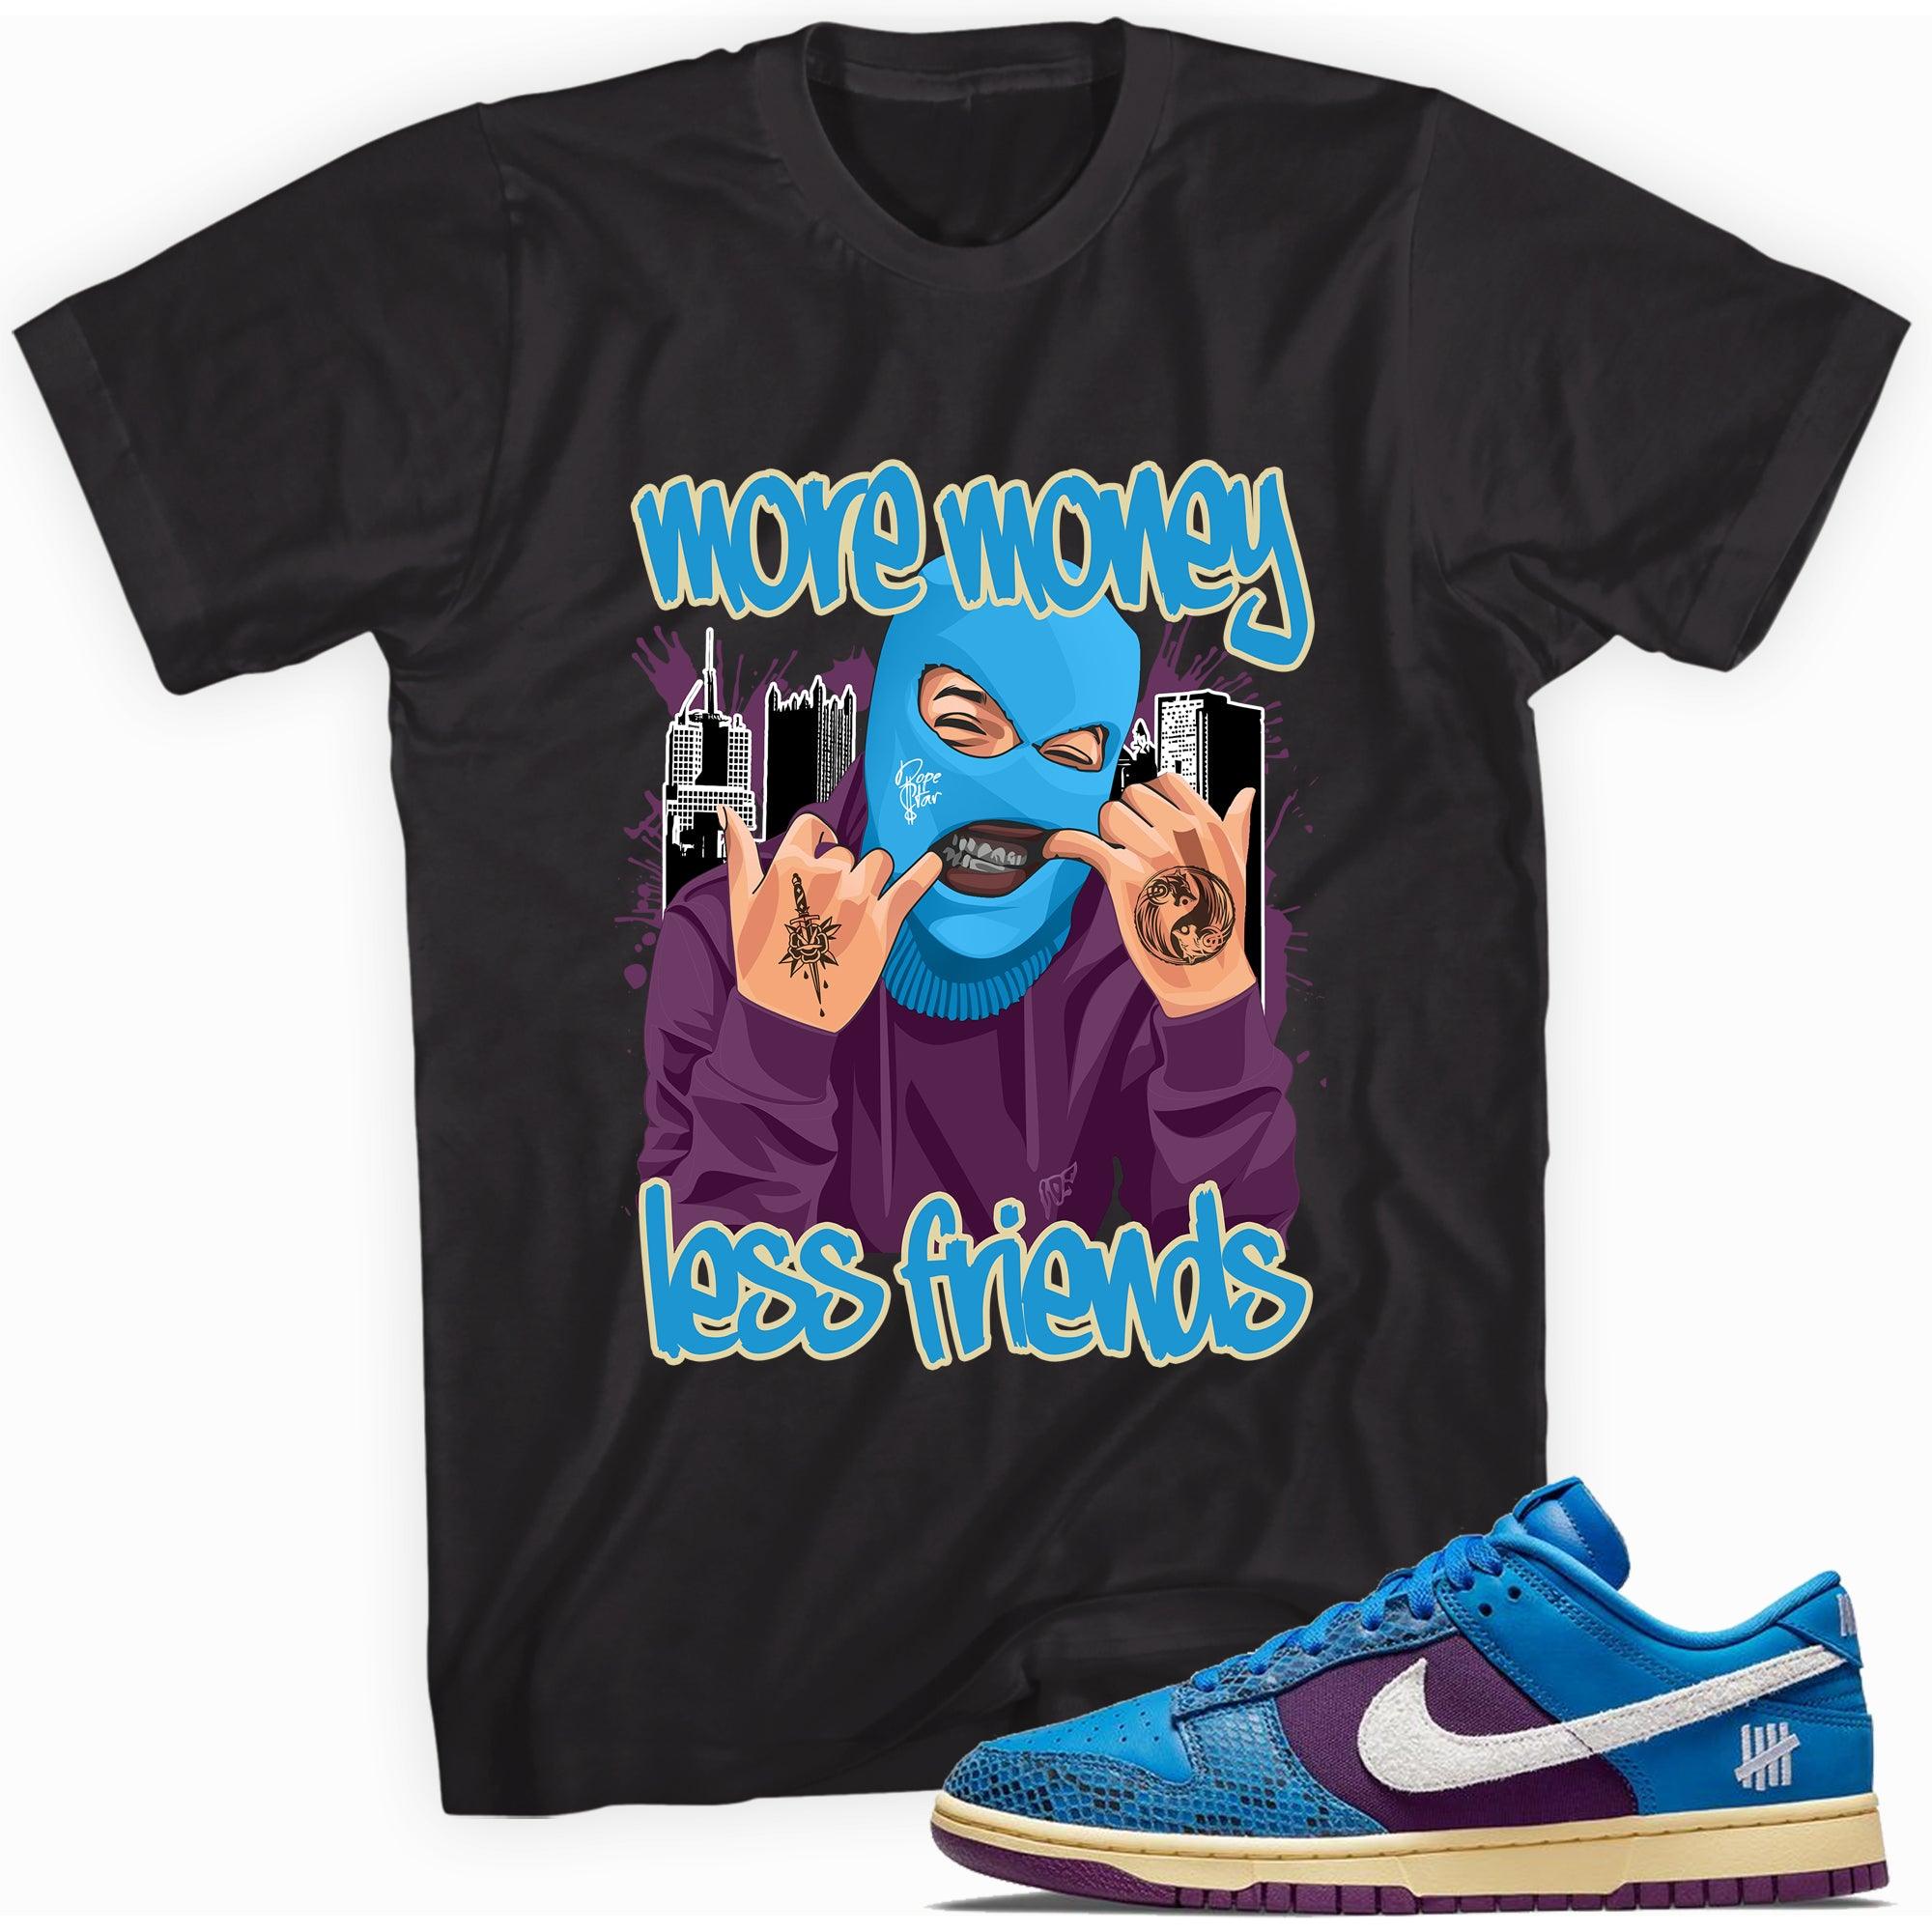 More Money Less Friends Shirt Dunk Low Undefeated 5 On It Dunk vs AF1 Sneakers photo